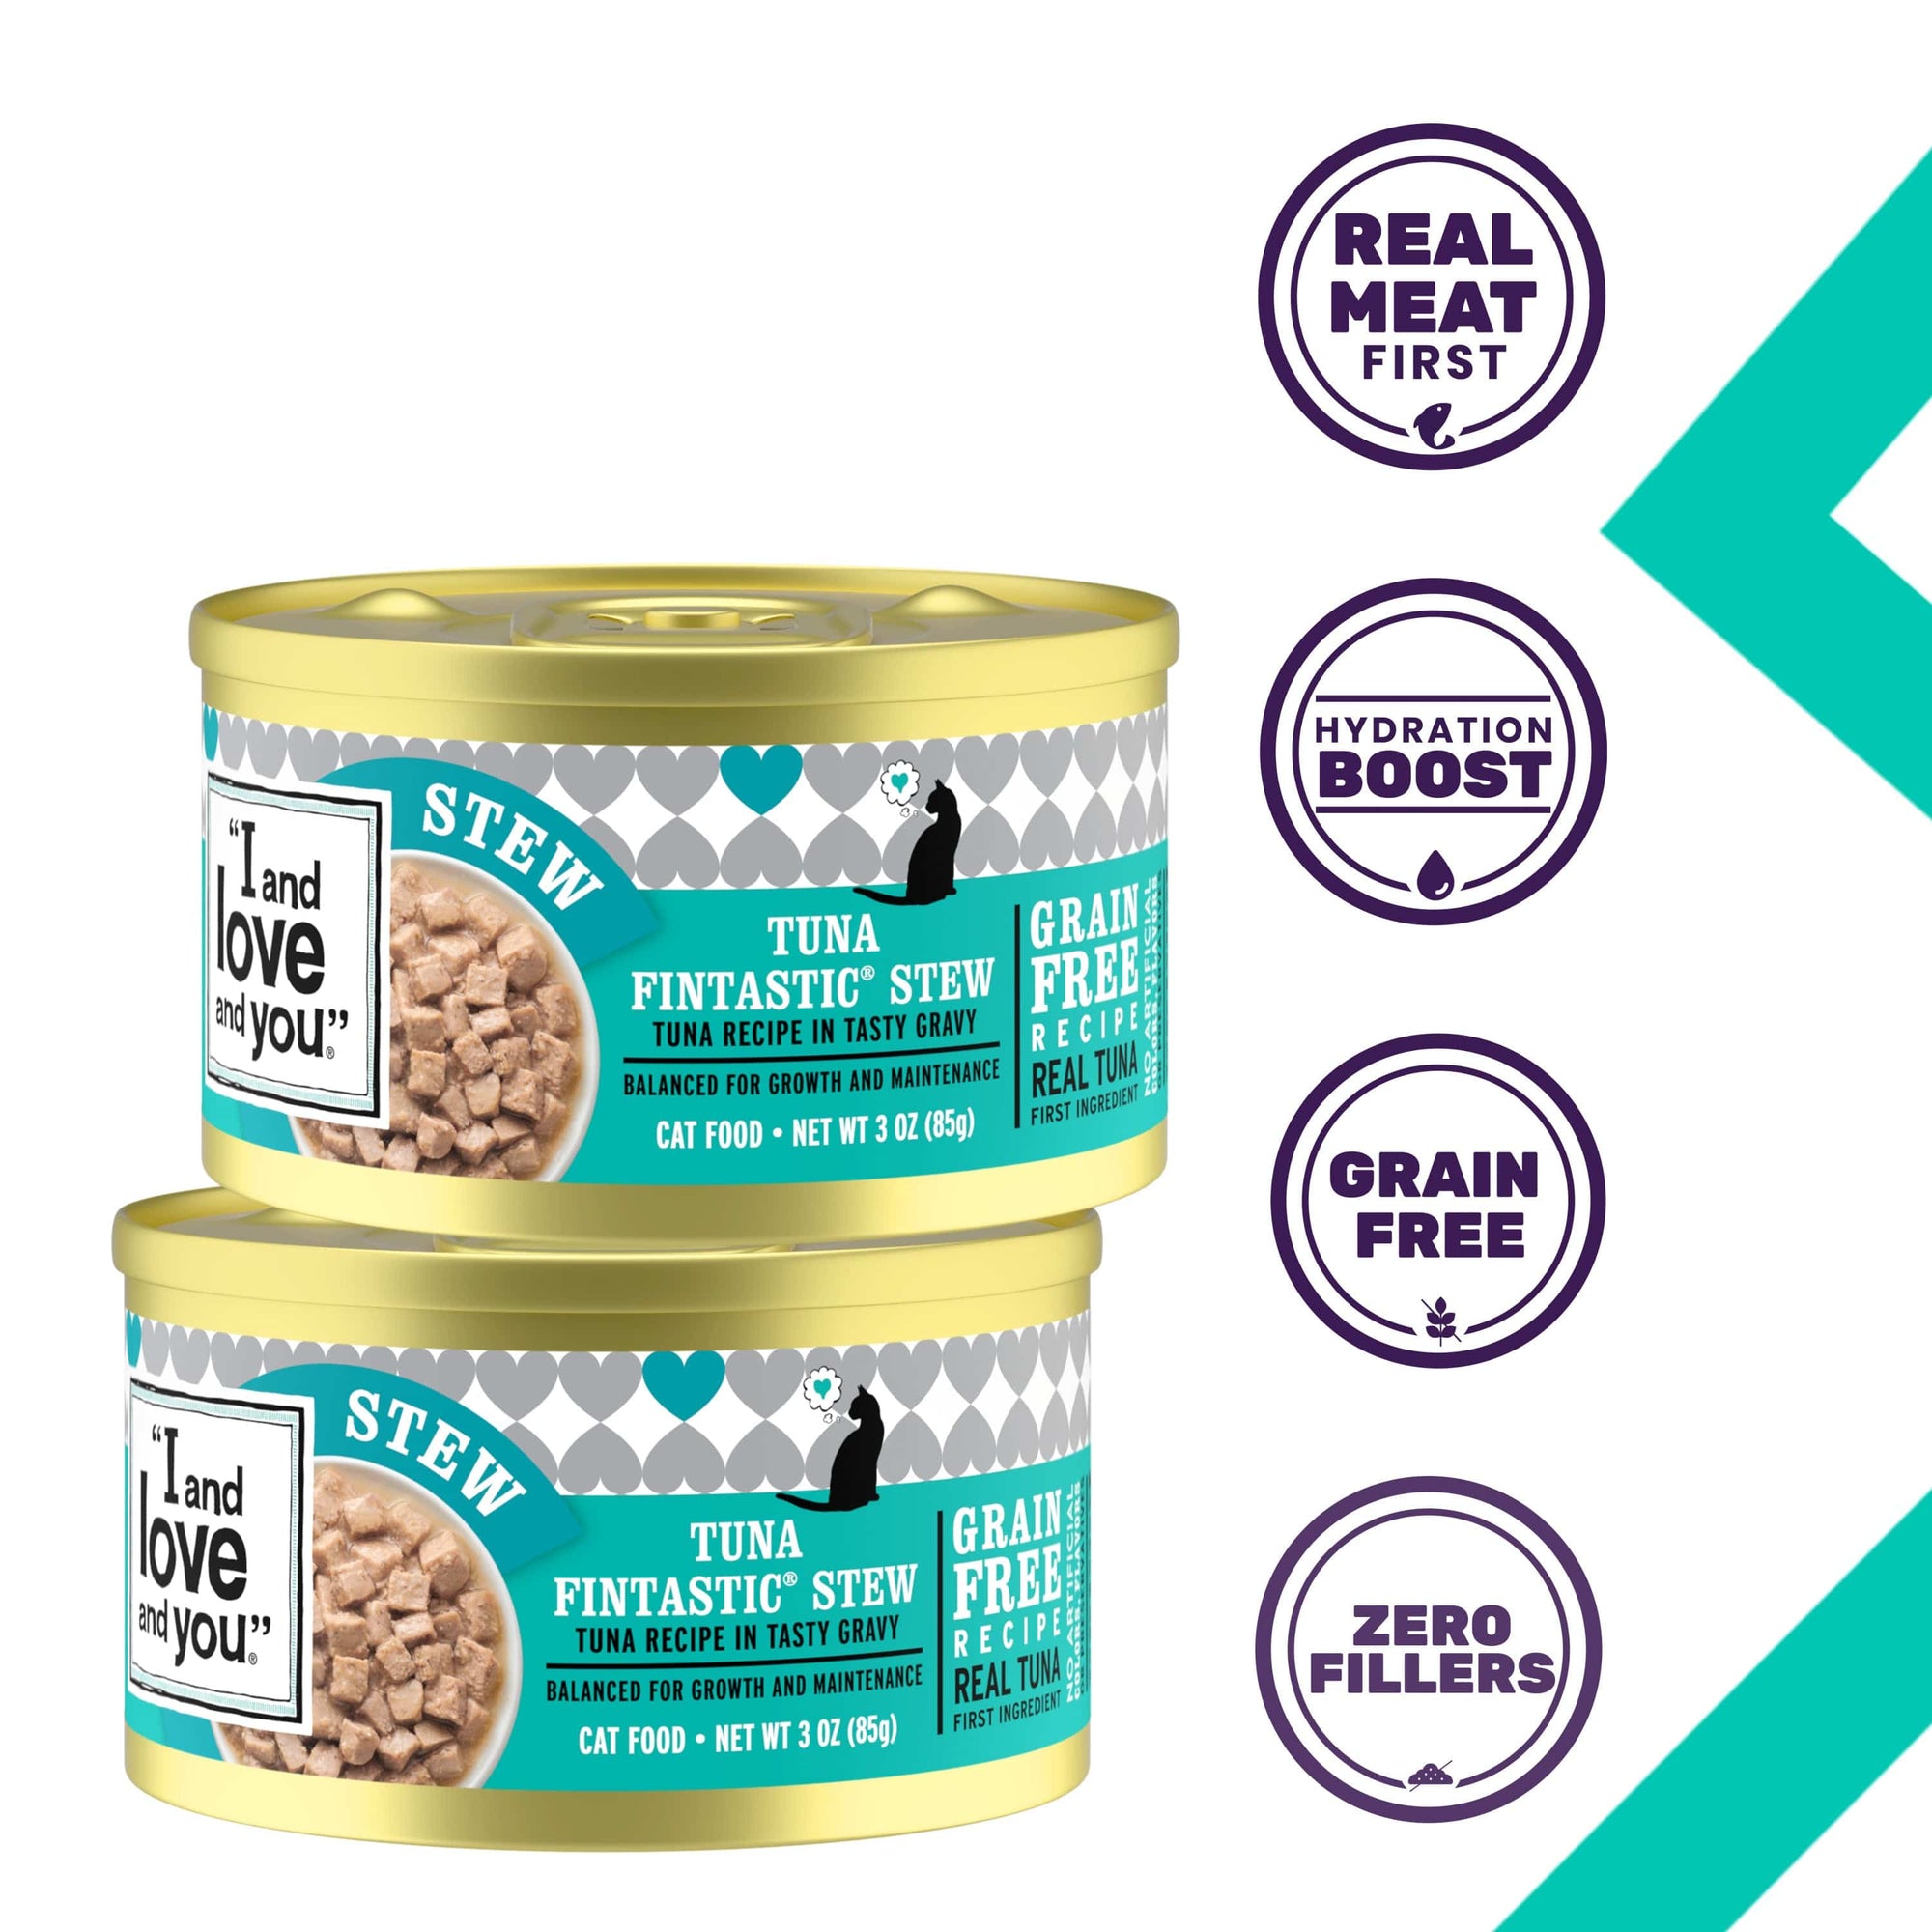 Two cans of Original Recipe - Tuna Fintastic Stew cat food showcasing product features such as real meat first, hydration boost, grain free and zero fillers.